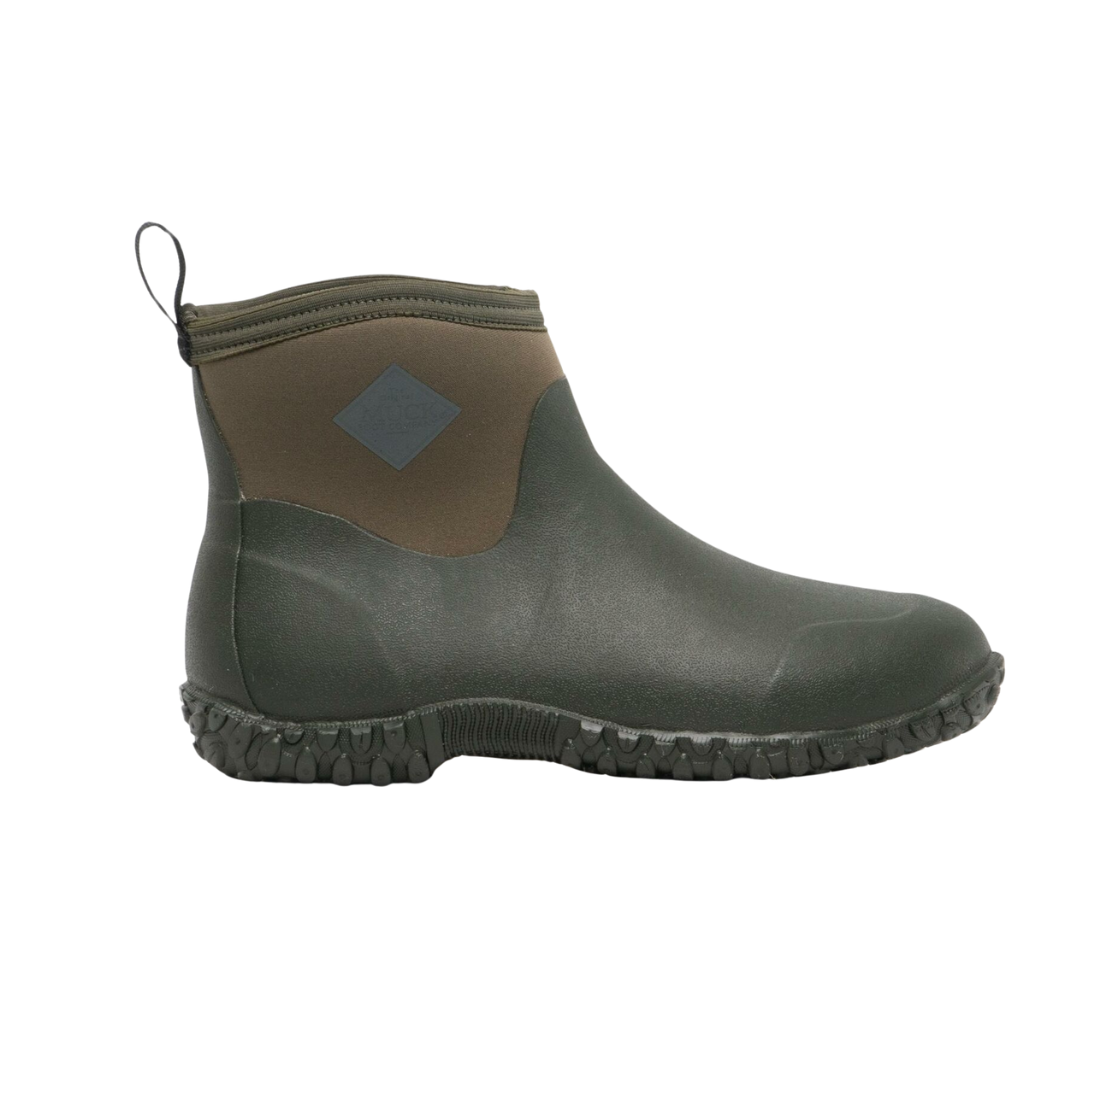 Muckster Waterproof Ankle Work Boots 10 Moss Workboots by Muck Boots | The Bloke Shop